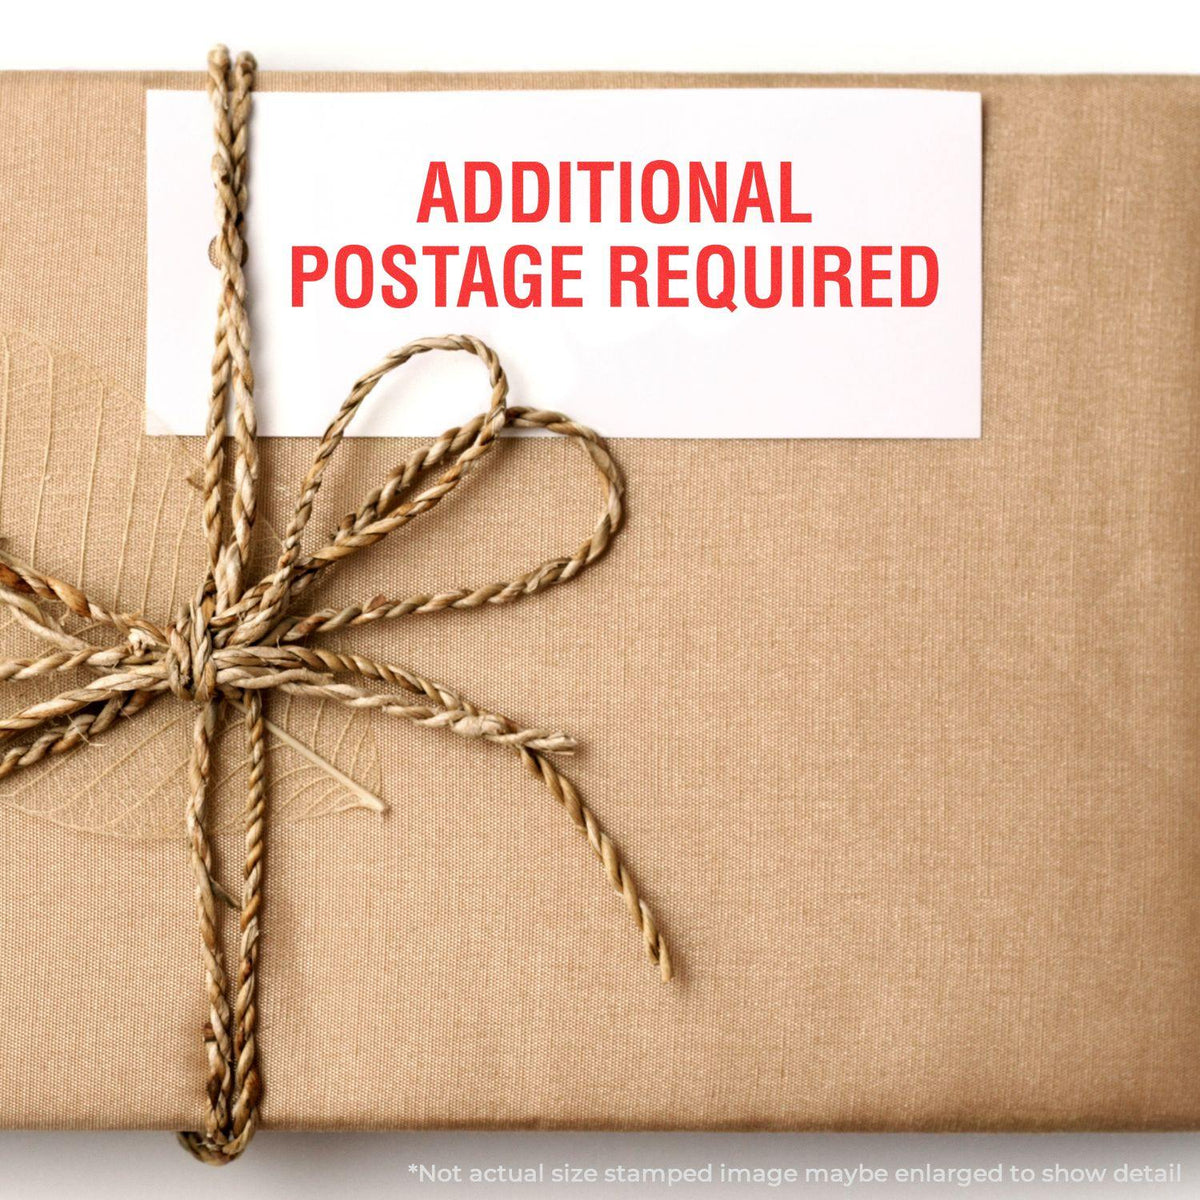 In Use Large Self-Inking Additional Postage Required Stamp Image